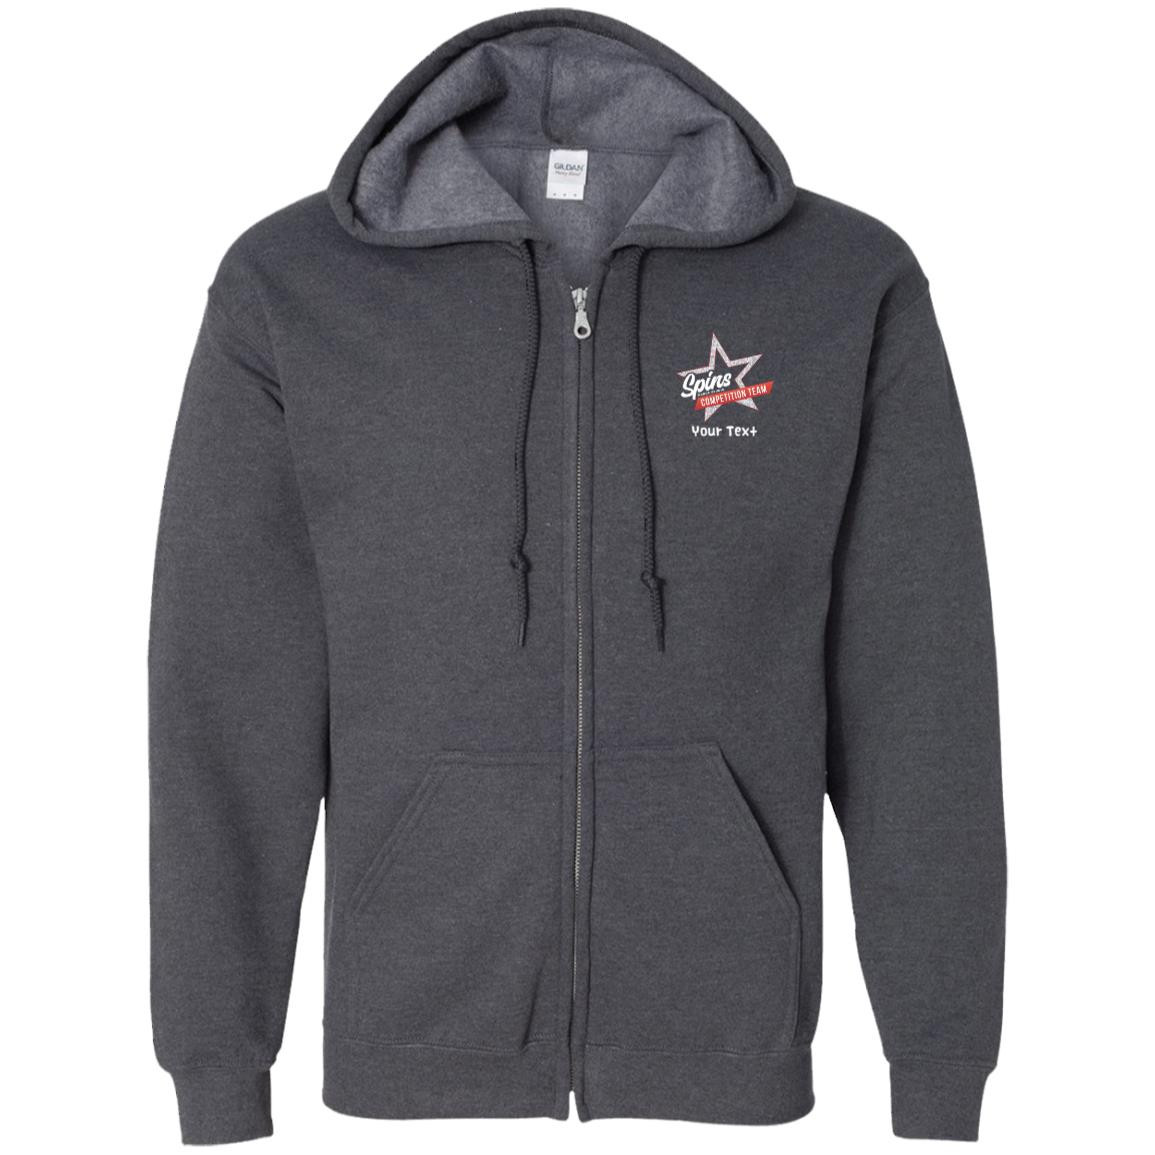 Spins Competition Team Zip Up Hooded Sweatshirt - With Personalization